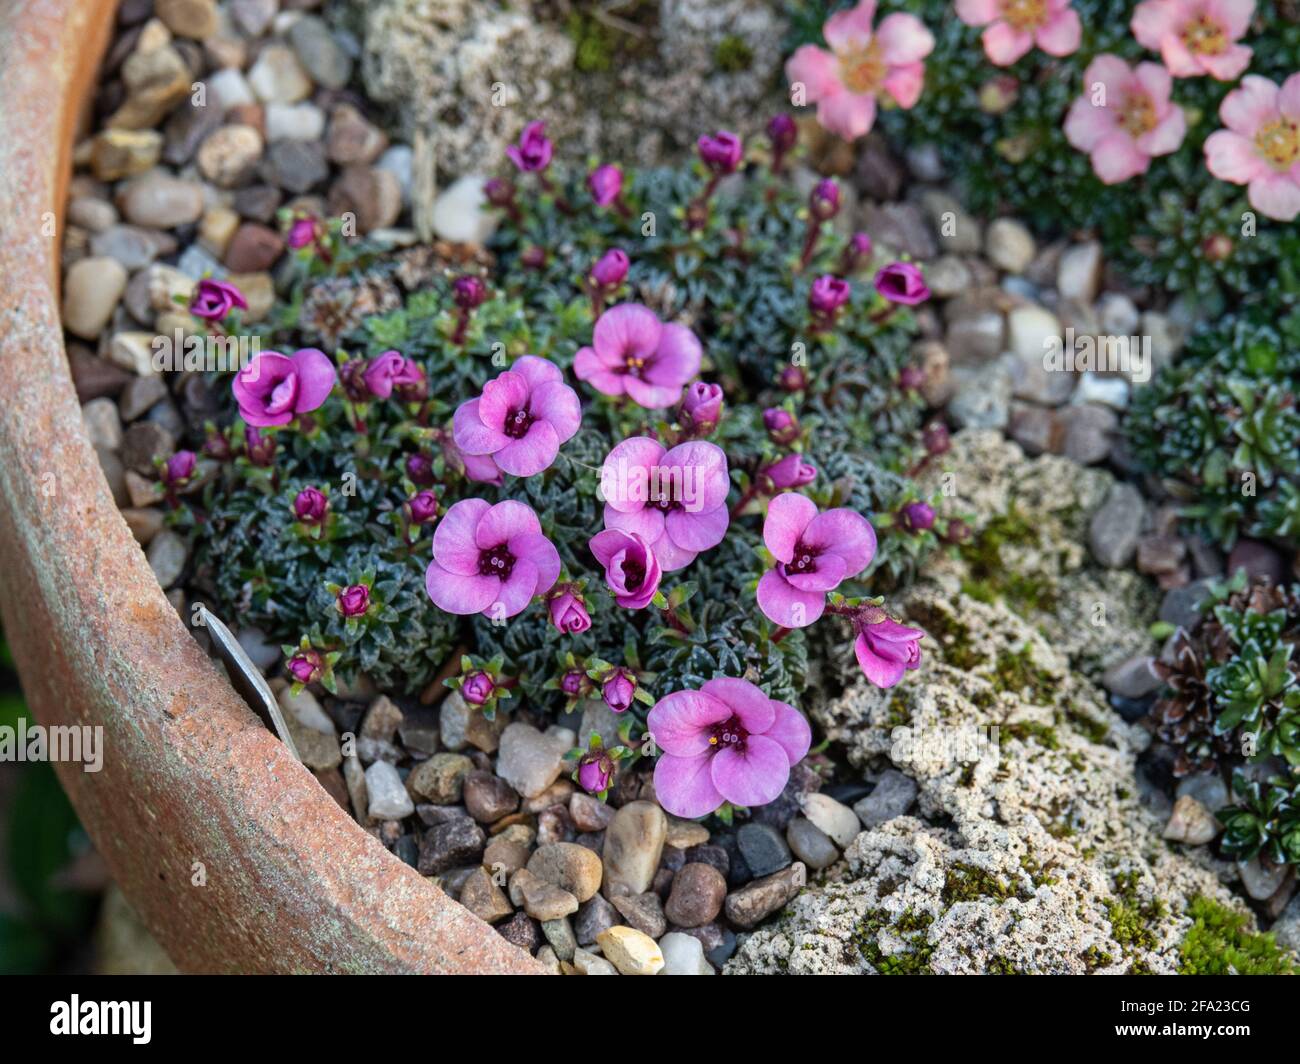 A plant of the kabschia Saxifrage Nancye growing in a terracotta pan and showing the clear pink flowers Stock Photo